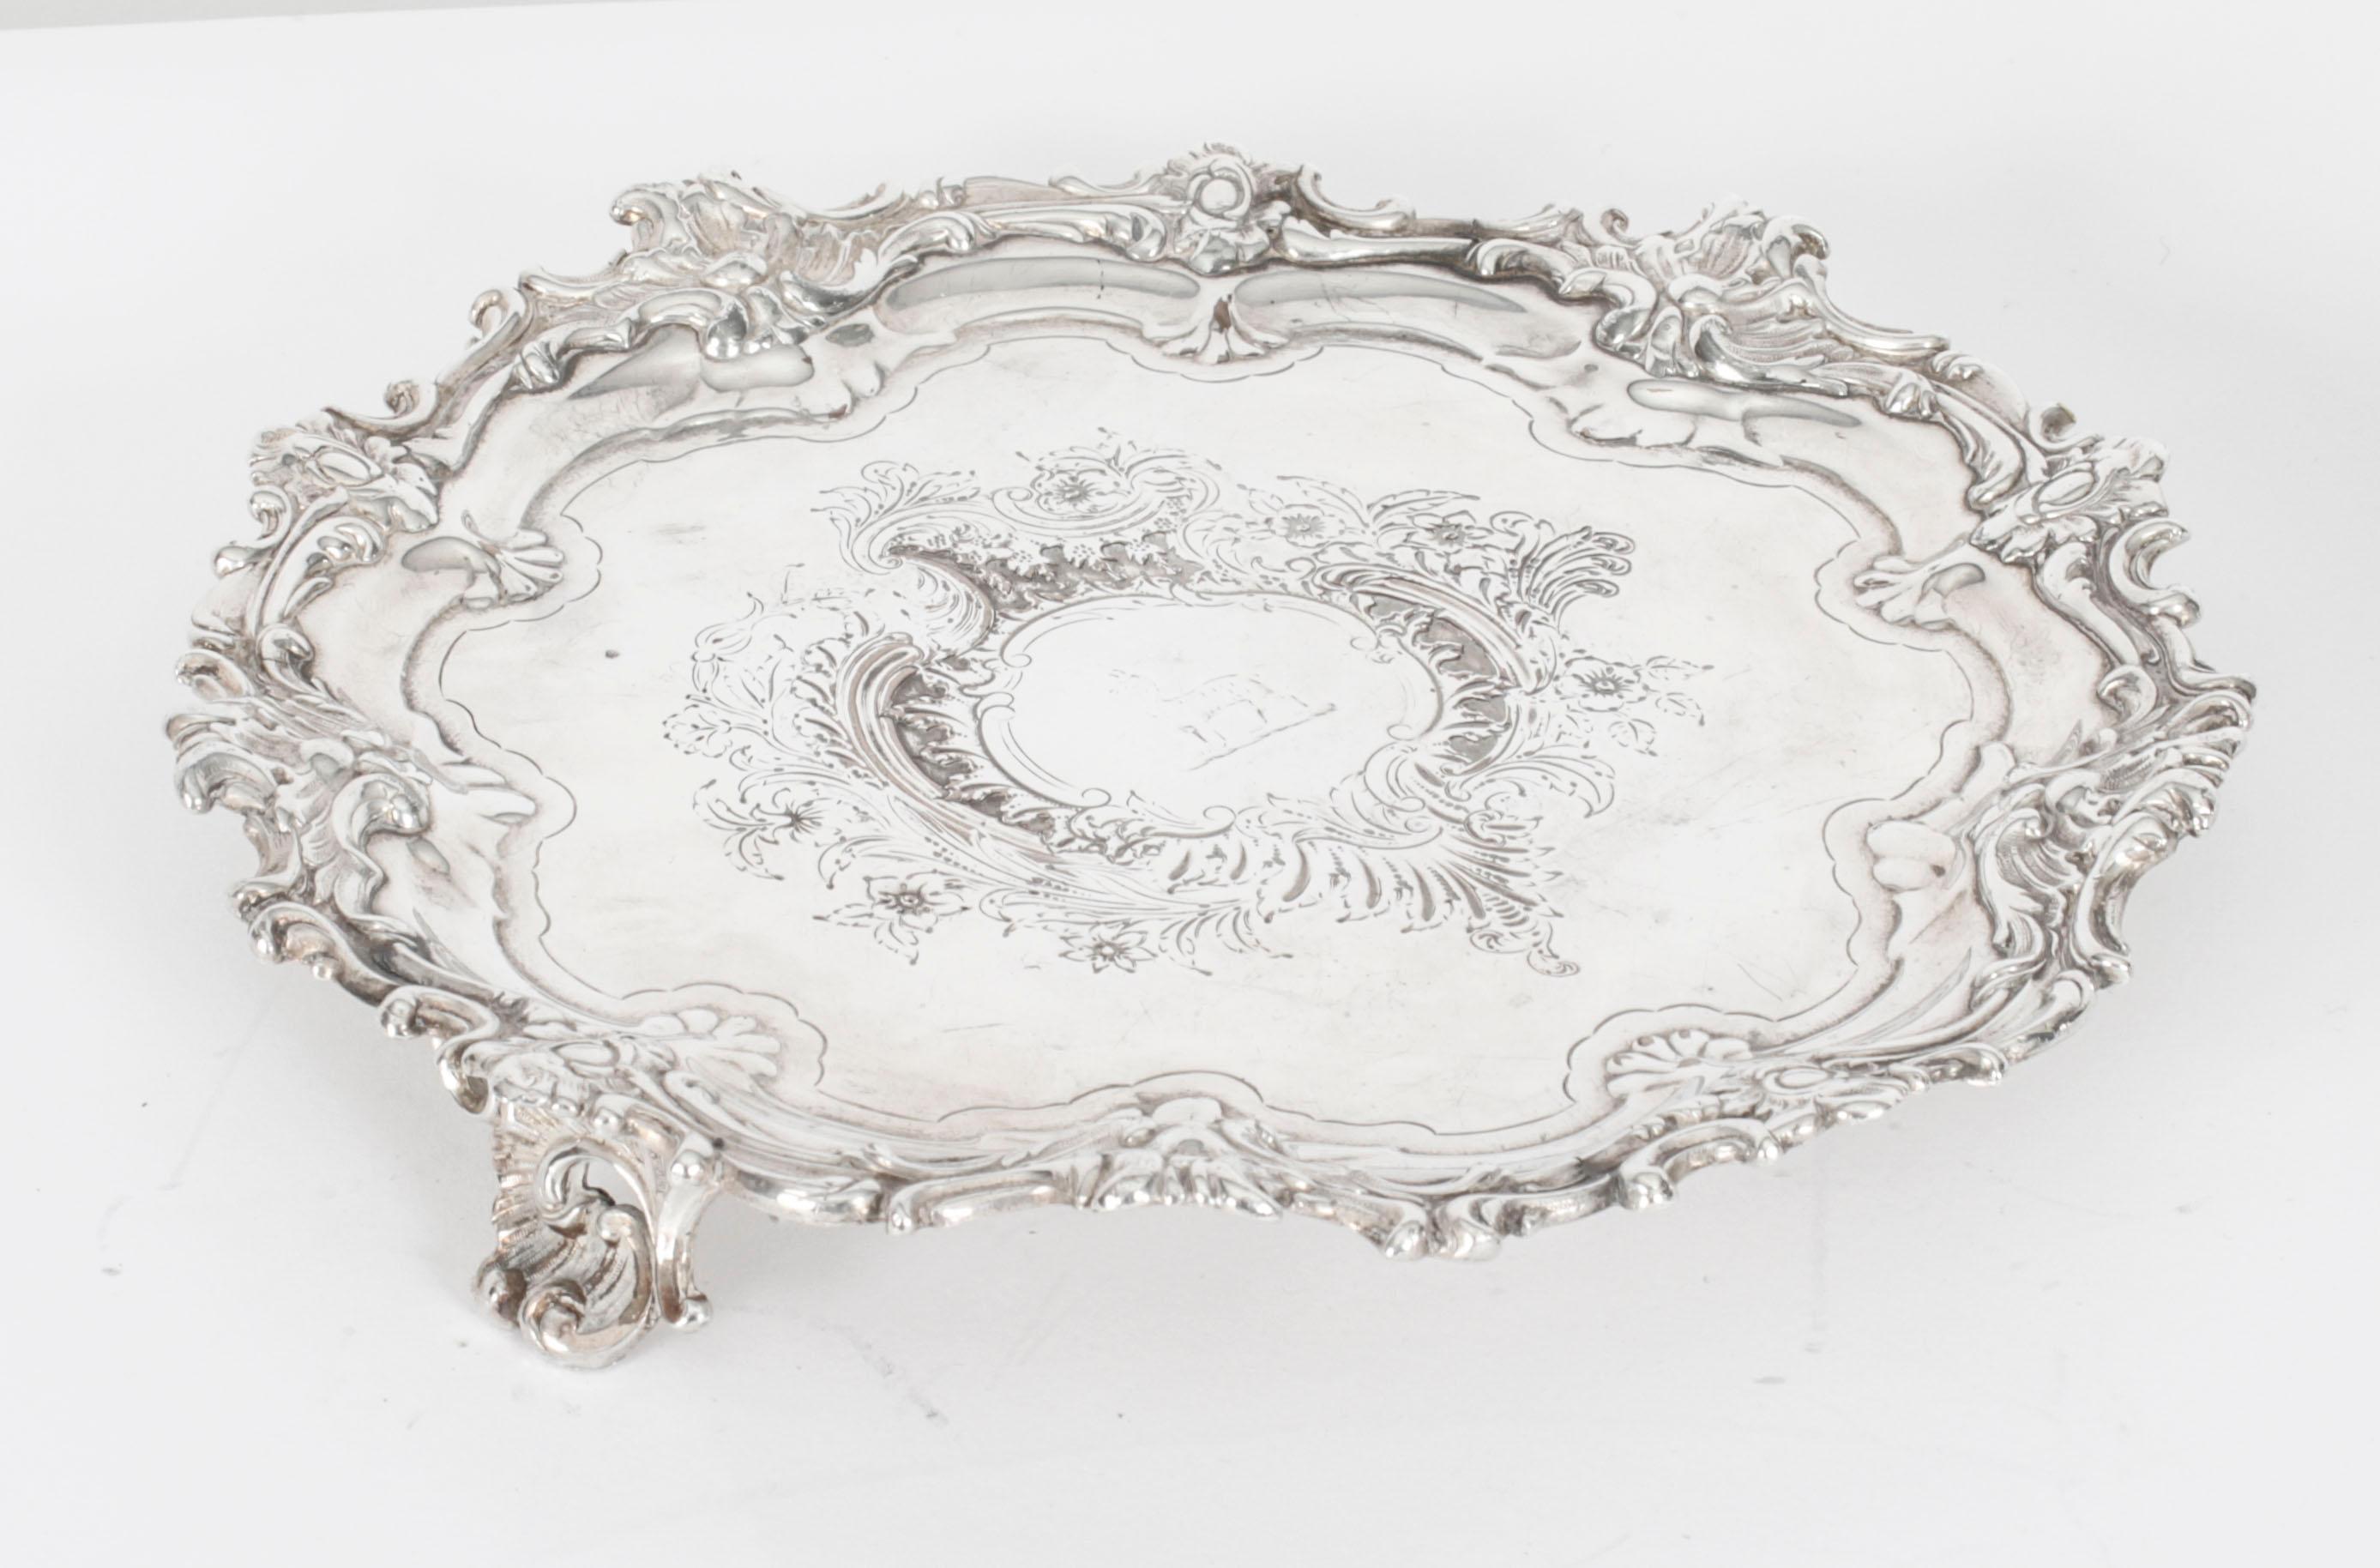 Antique Old Shefield Silver Plated Salver by Smith, Tate, Nicholson 19th Century For Sale 4